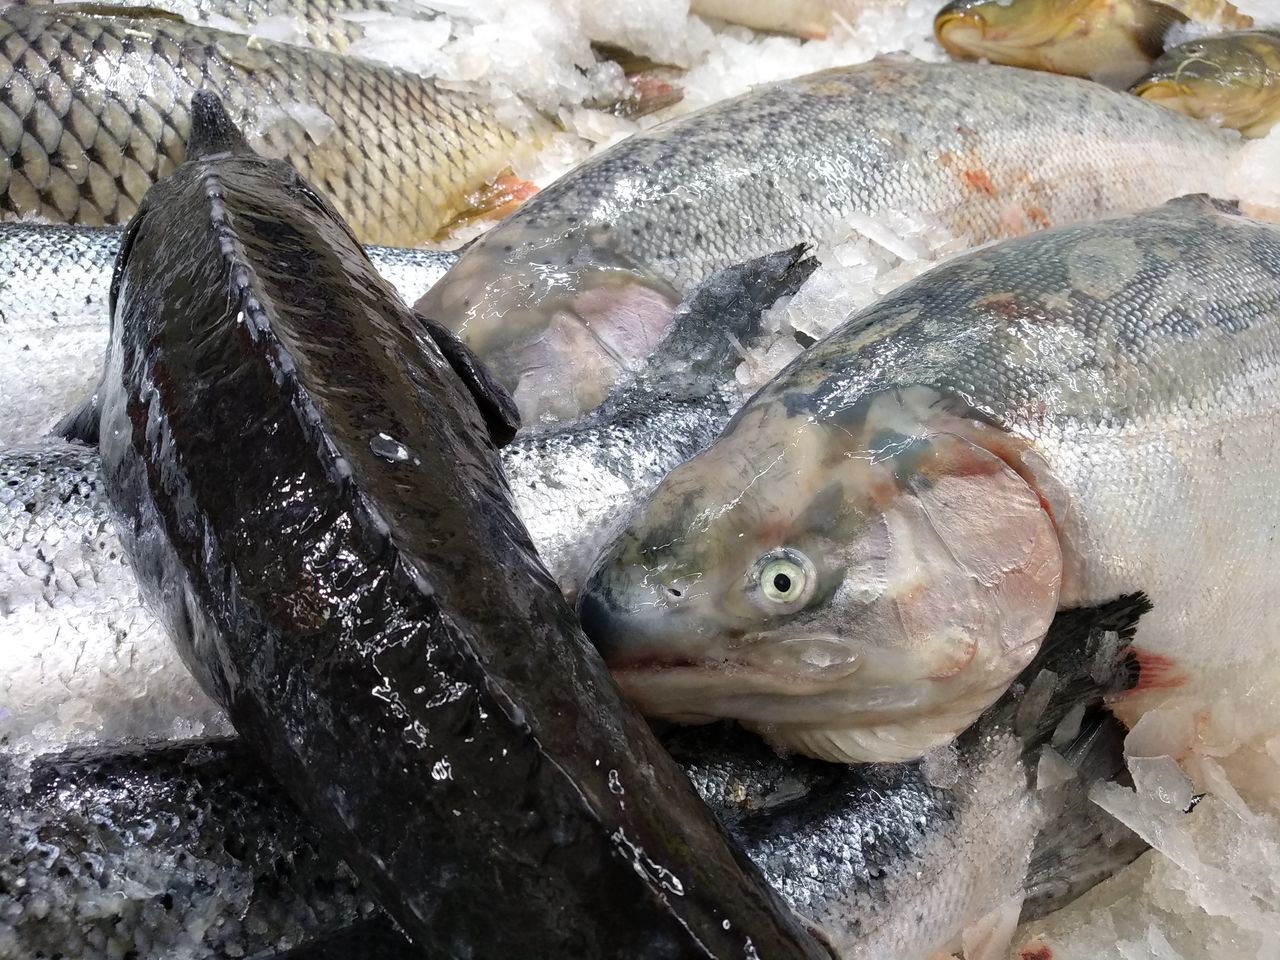 fish, vertebrate, seafood, animal, food, food and drink, for sale, freshness, no people, retail, cold temperature, high angle view, ice, wellbeing, market, healthy eating, raw food, fish market, close-up, animal themes, sale, retail display, fishing industry